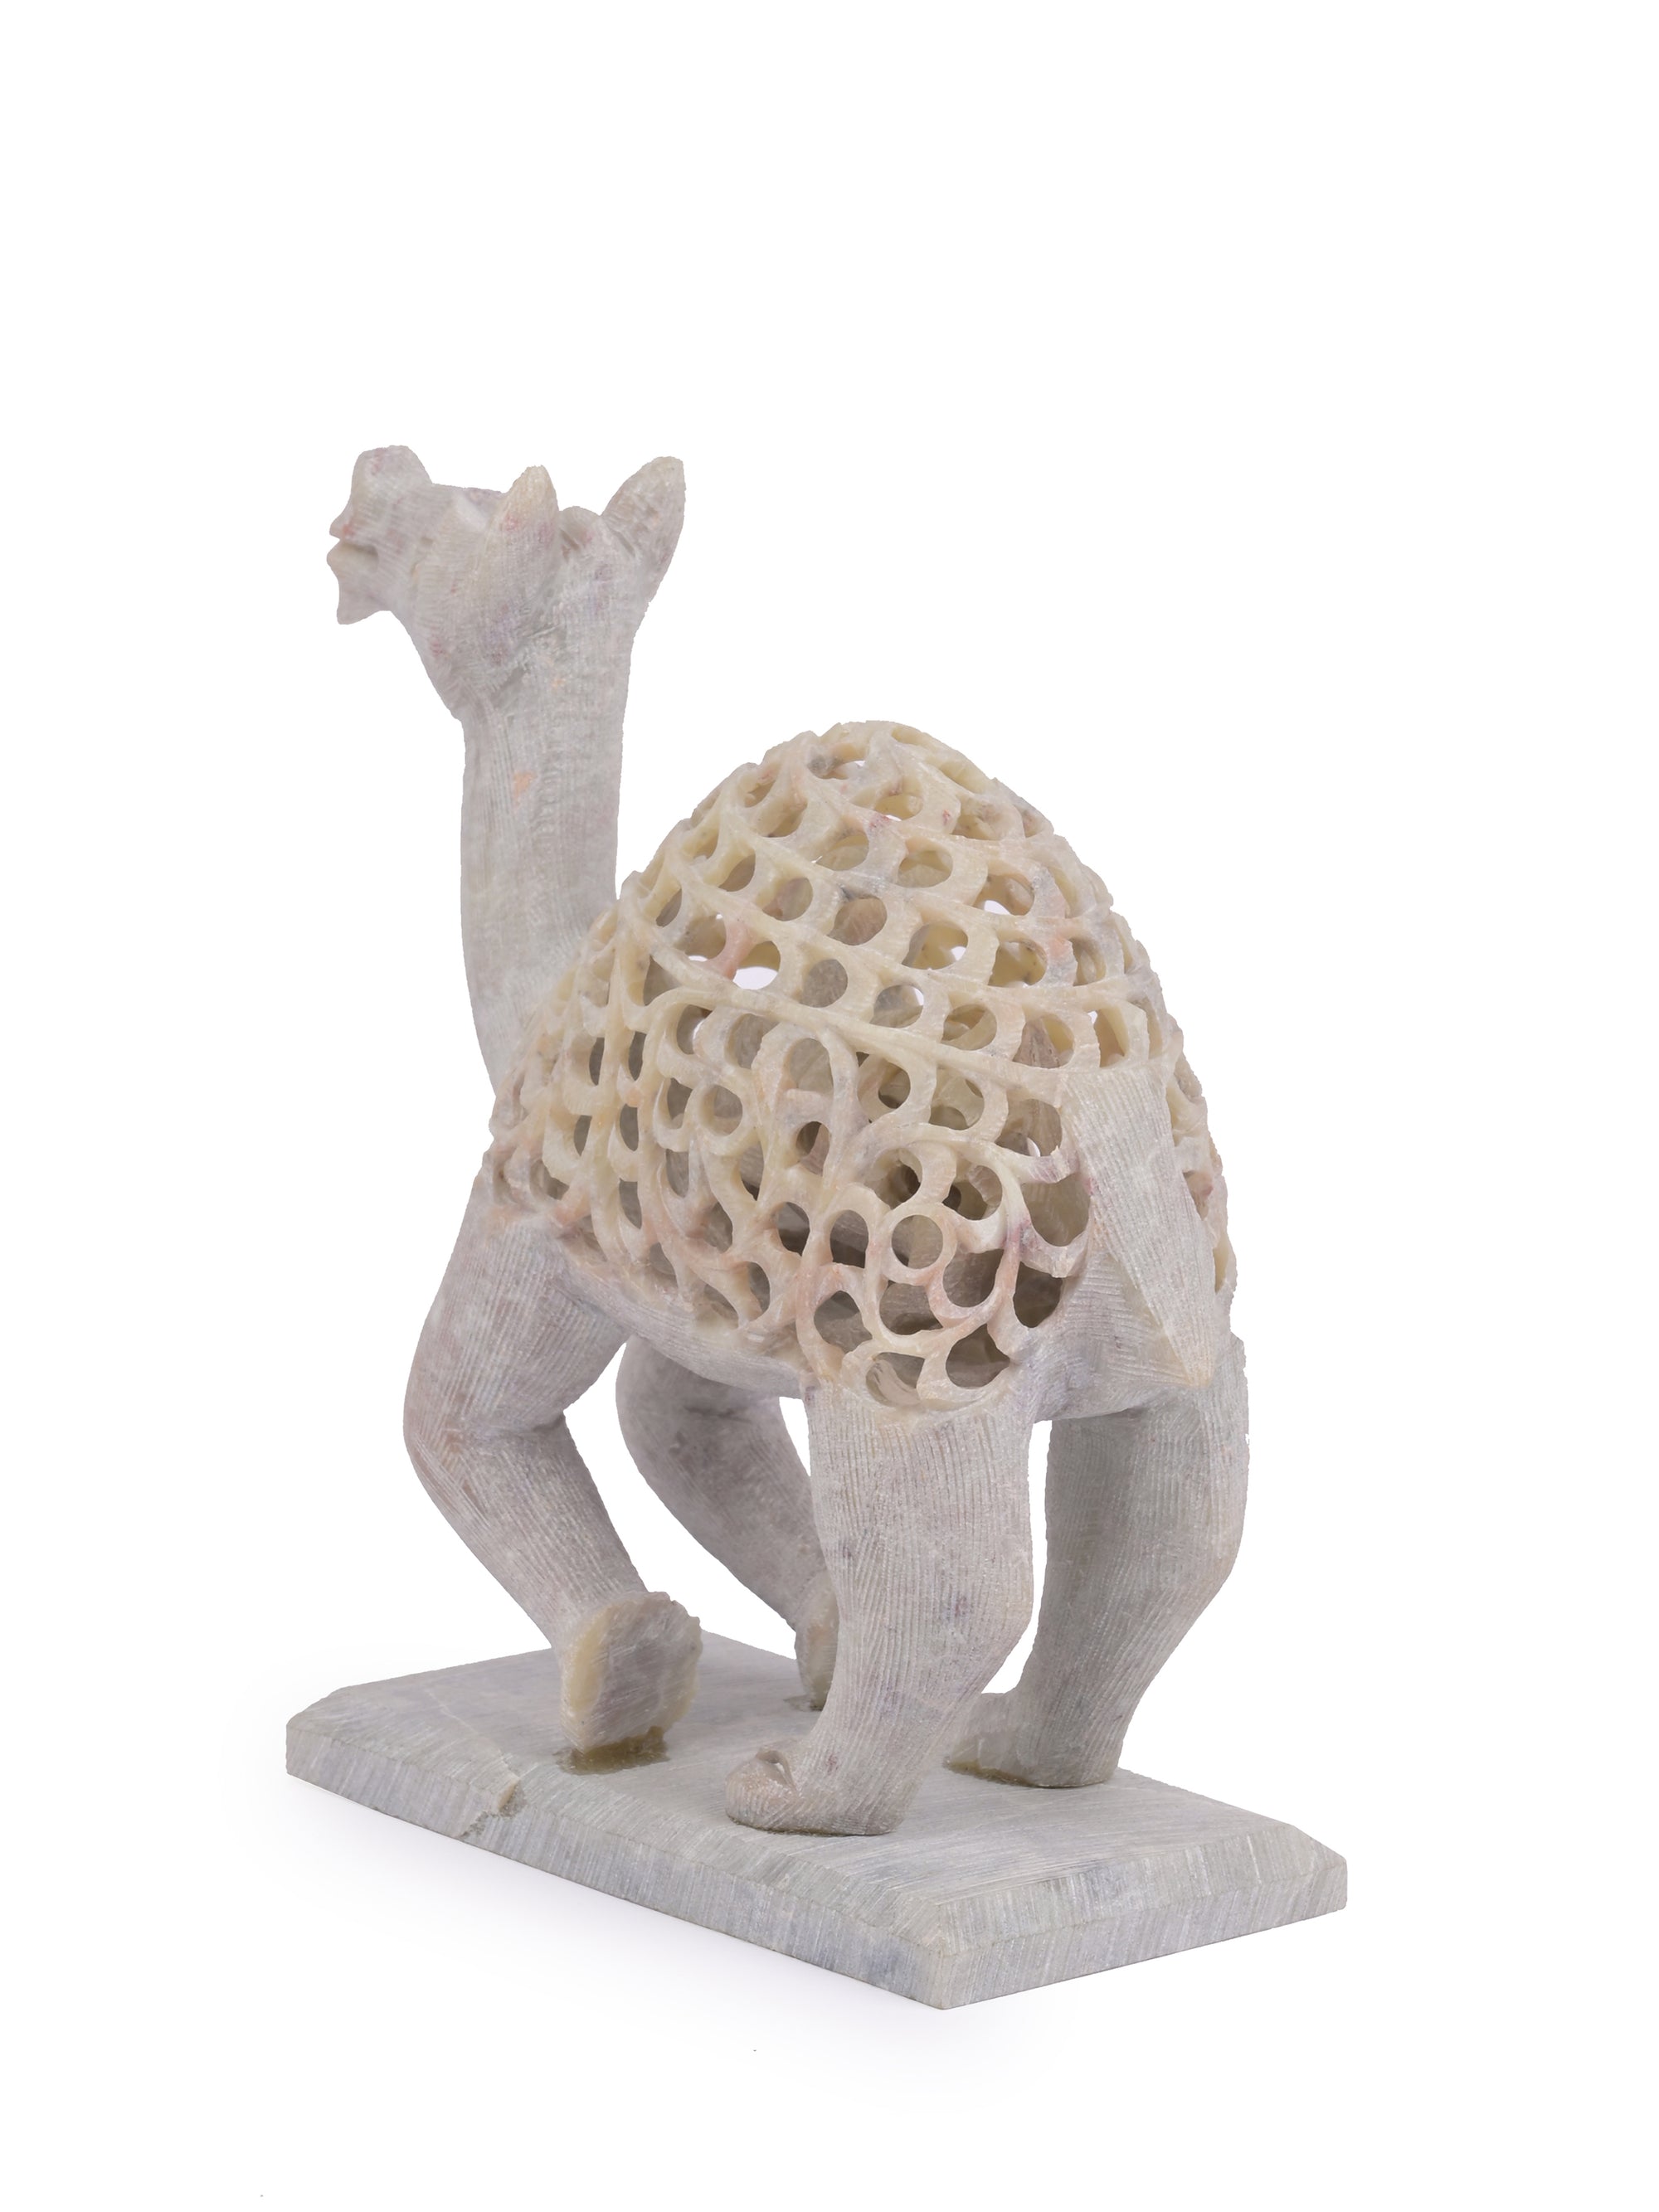 Camel Decorative showpiece with Jaali or open work hand carving on stone - The Heritage Artifacts